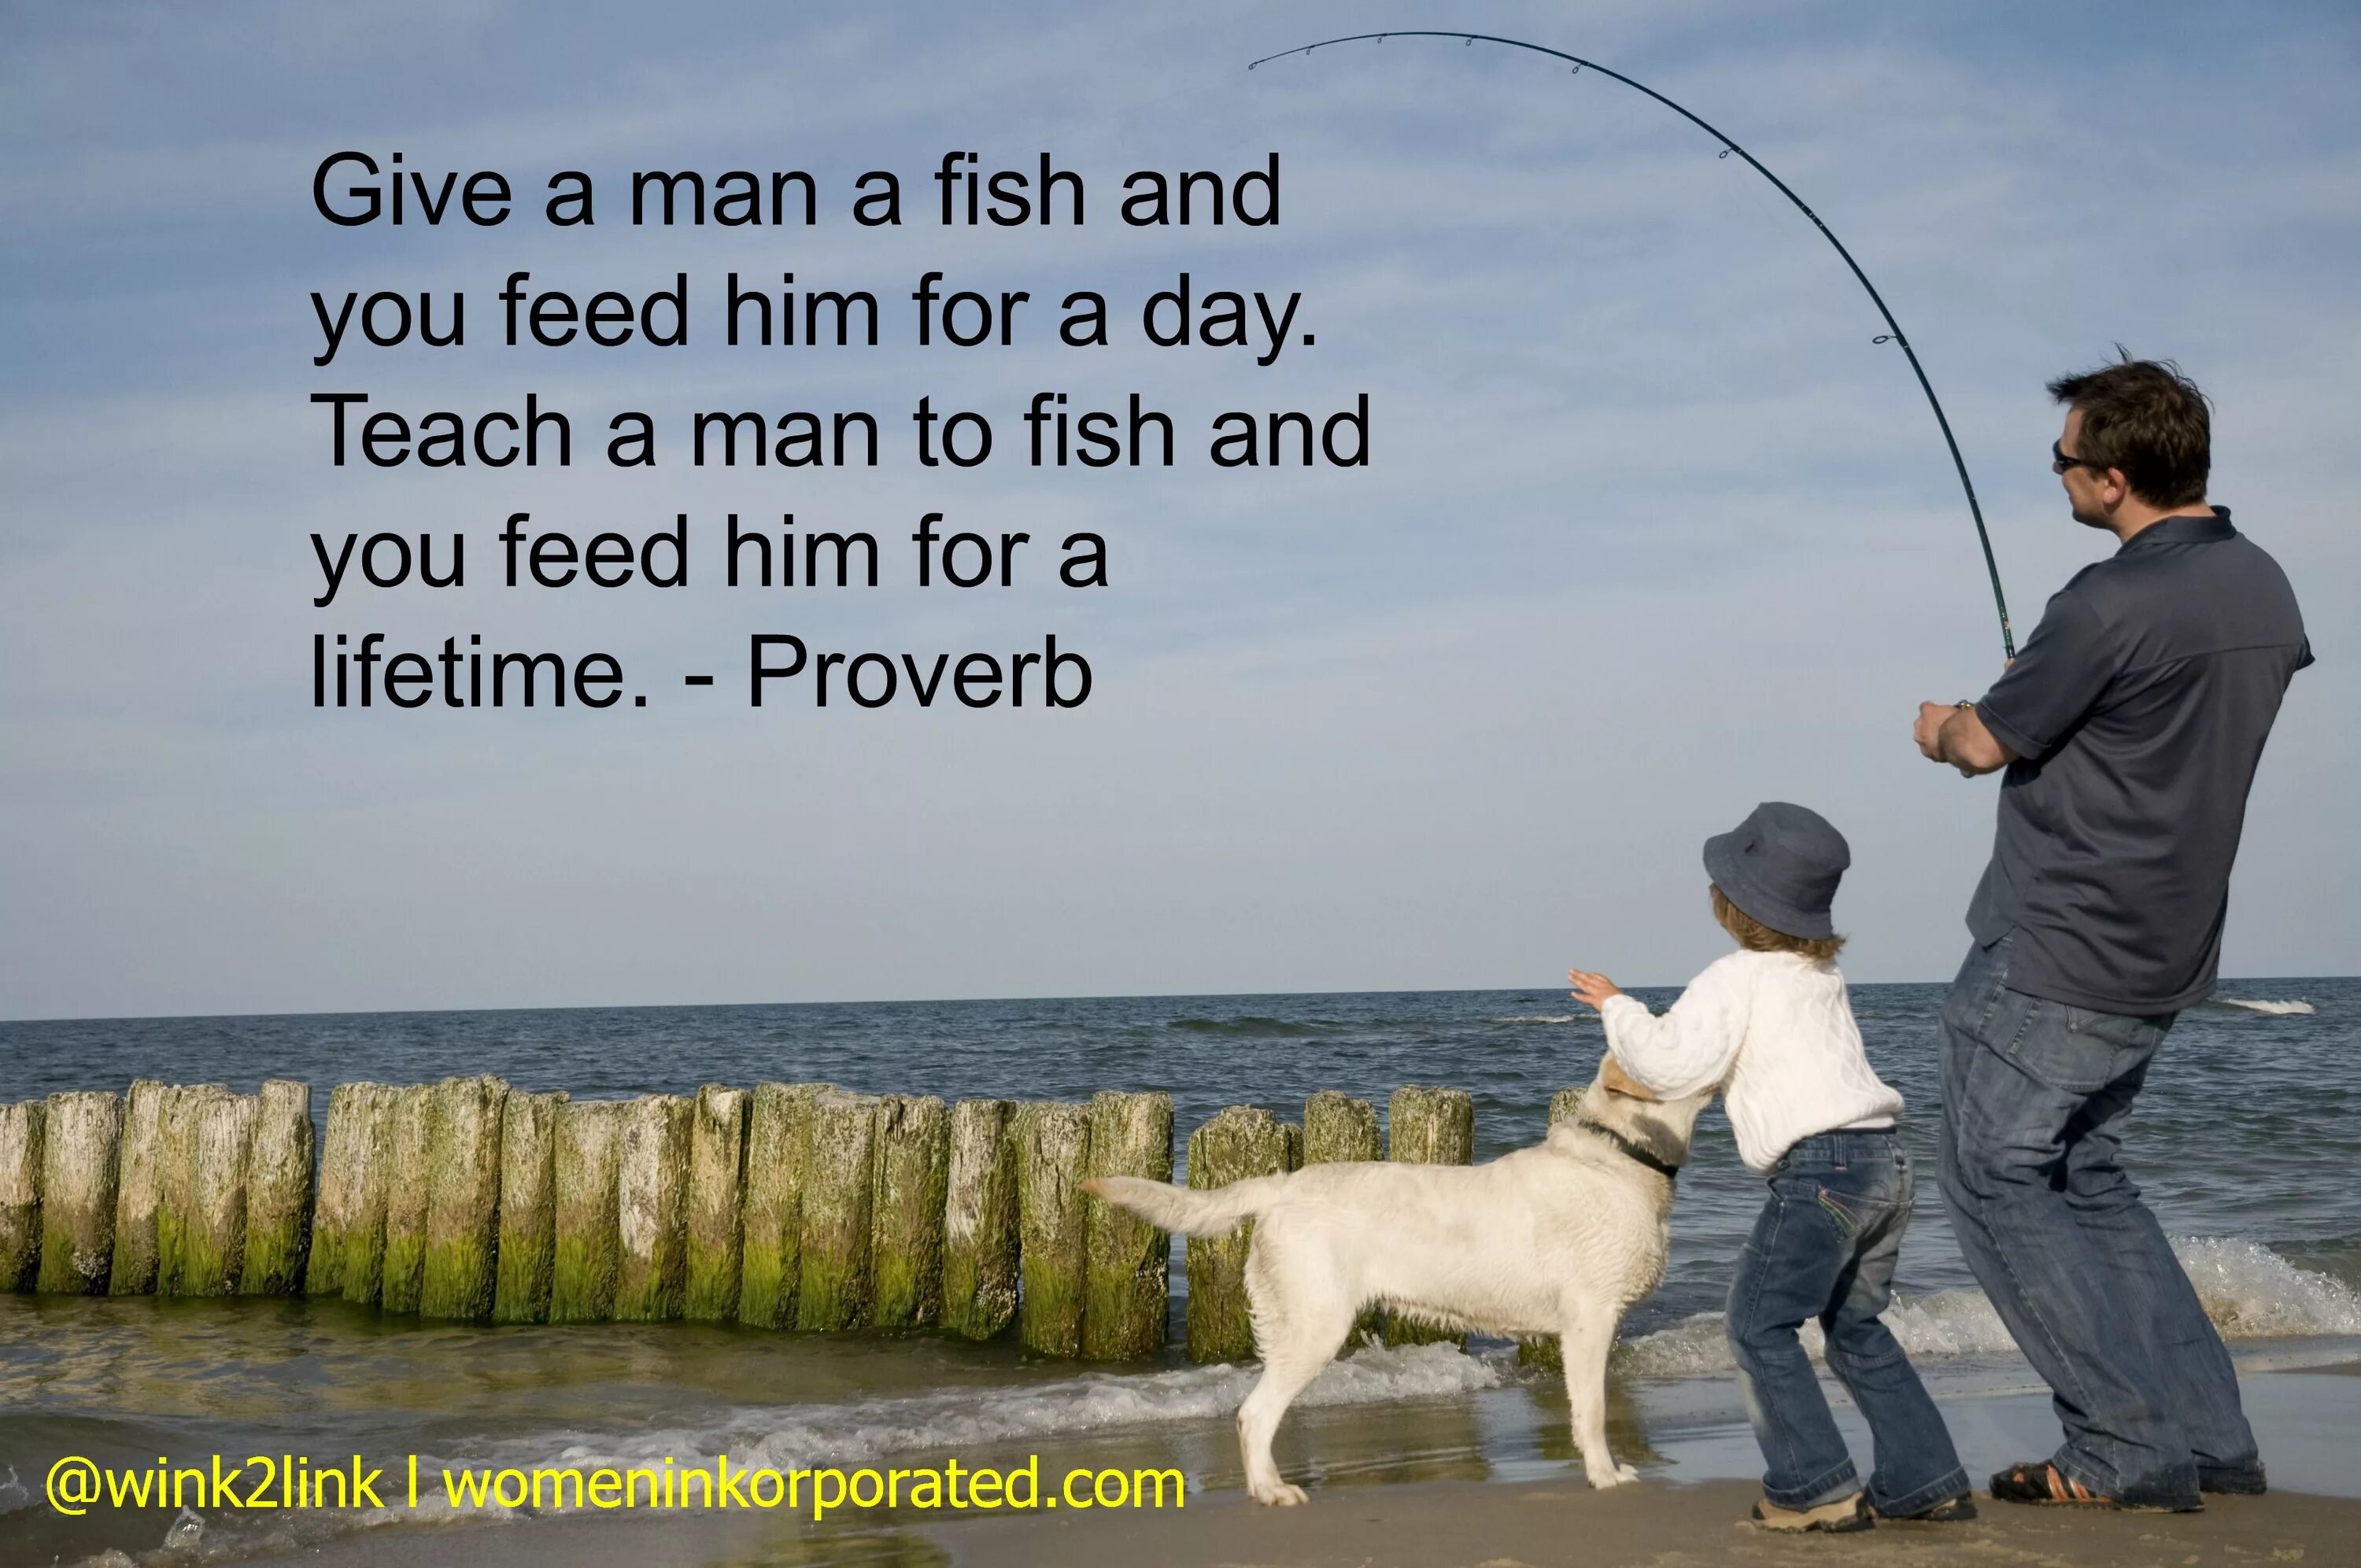 He like a fish. Give a man a Fish and you Feed him for a Day; teach a man to Fish and you Feed him for a Lifetime. Teach a man to Fish. You Day man a man Lifetime teach a for you Feed. If you teach how to Fish.